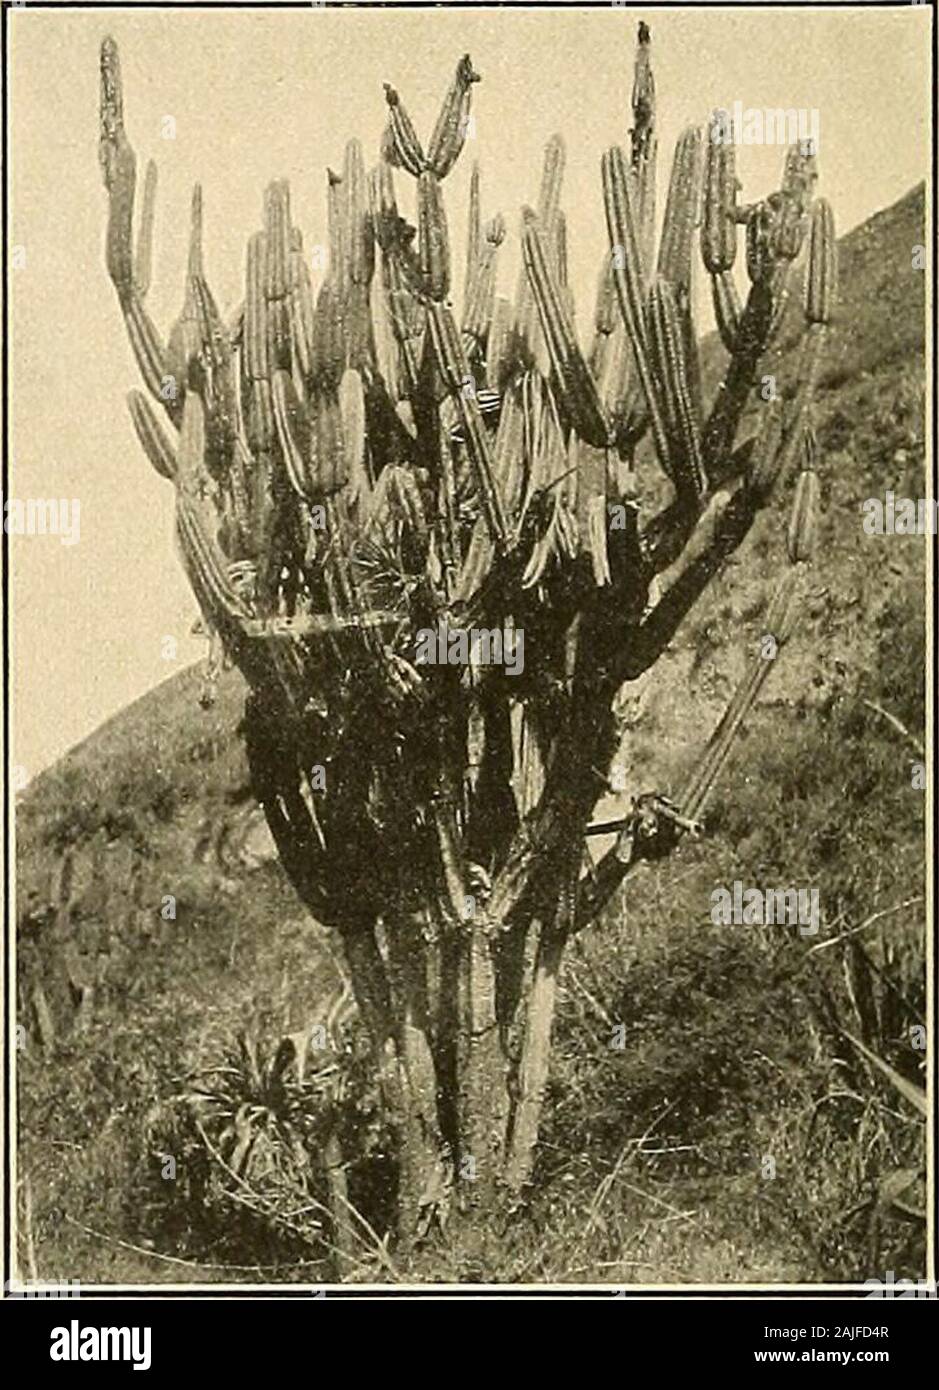 The Cactaceae : descriptions and illustrations of plants of the cactus family . ownvery much. A cristate form of Cereus aragonii was named as a variety (palmatus) by Weber(Bull. Mus. Hist. Nat. Paris 8:456. 1902). Illustrations: Boletin de Fomento Costa Rica 4:117; Iberica 48: 339, both illustrationsfrom the same source as the one used as figure 135. Figure 135 is from a photograph taken by Otto Lutz at Tres Rios, Costa Rica, 1,350meters altitude. 11. Lemaireocereus stellatus (Pfeiffer) Britton and Rose, Contr. U. S. Nat. Herb. 12: 426. 1909. Cereus stellatus Pfeiffer, Allg. Gartenz. 4: 258. 1 Stock Photo